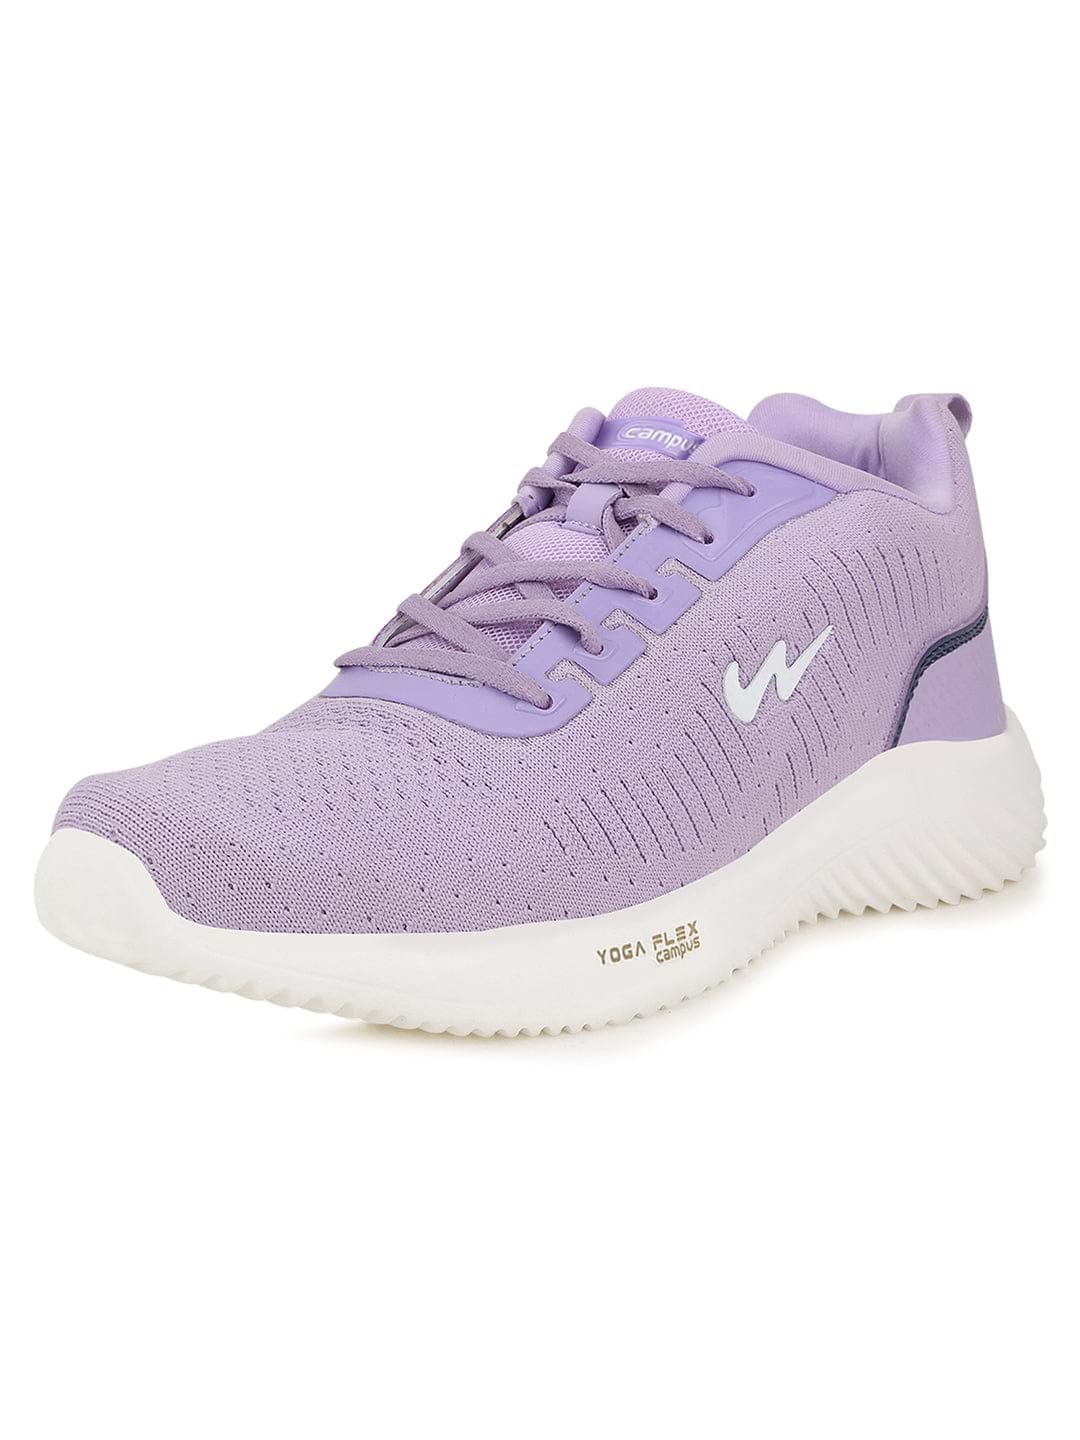 Campus Women's Jessica Running Shoes